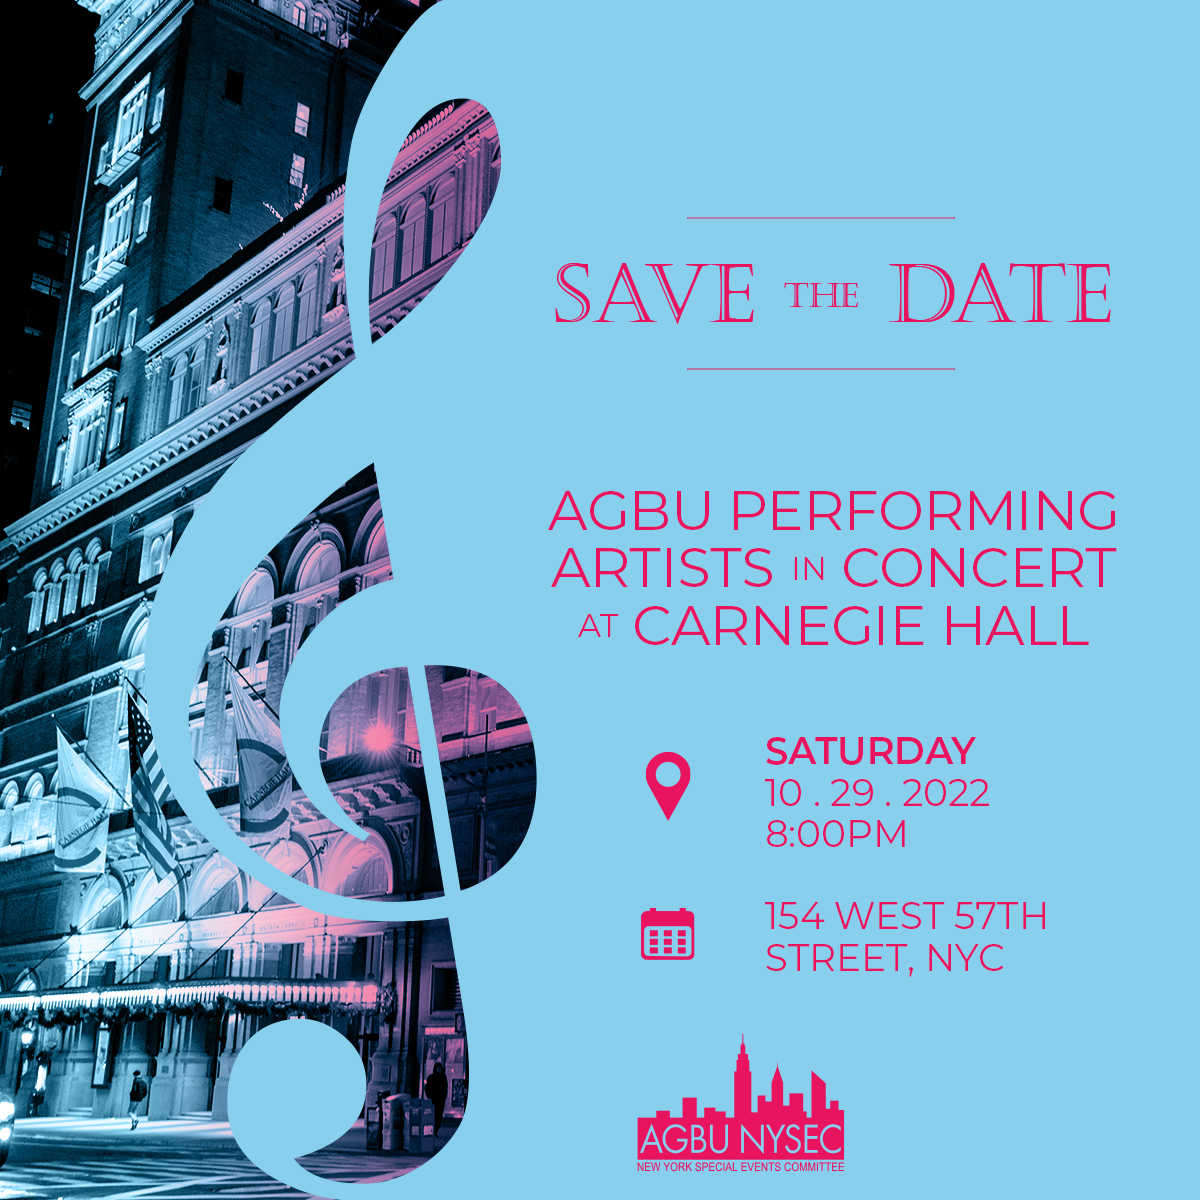 AGBU Performing Artists in Concert at Carnegie Hall